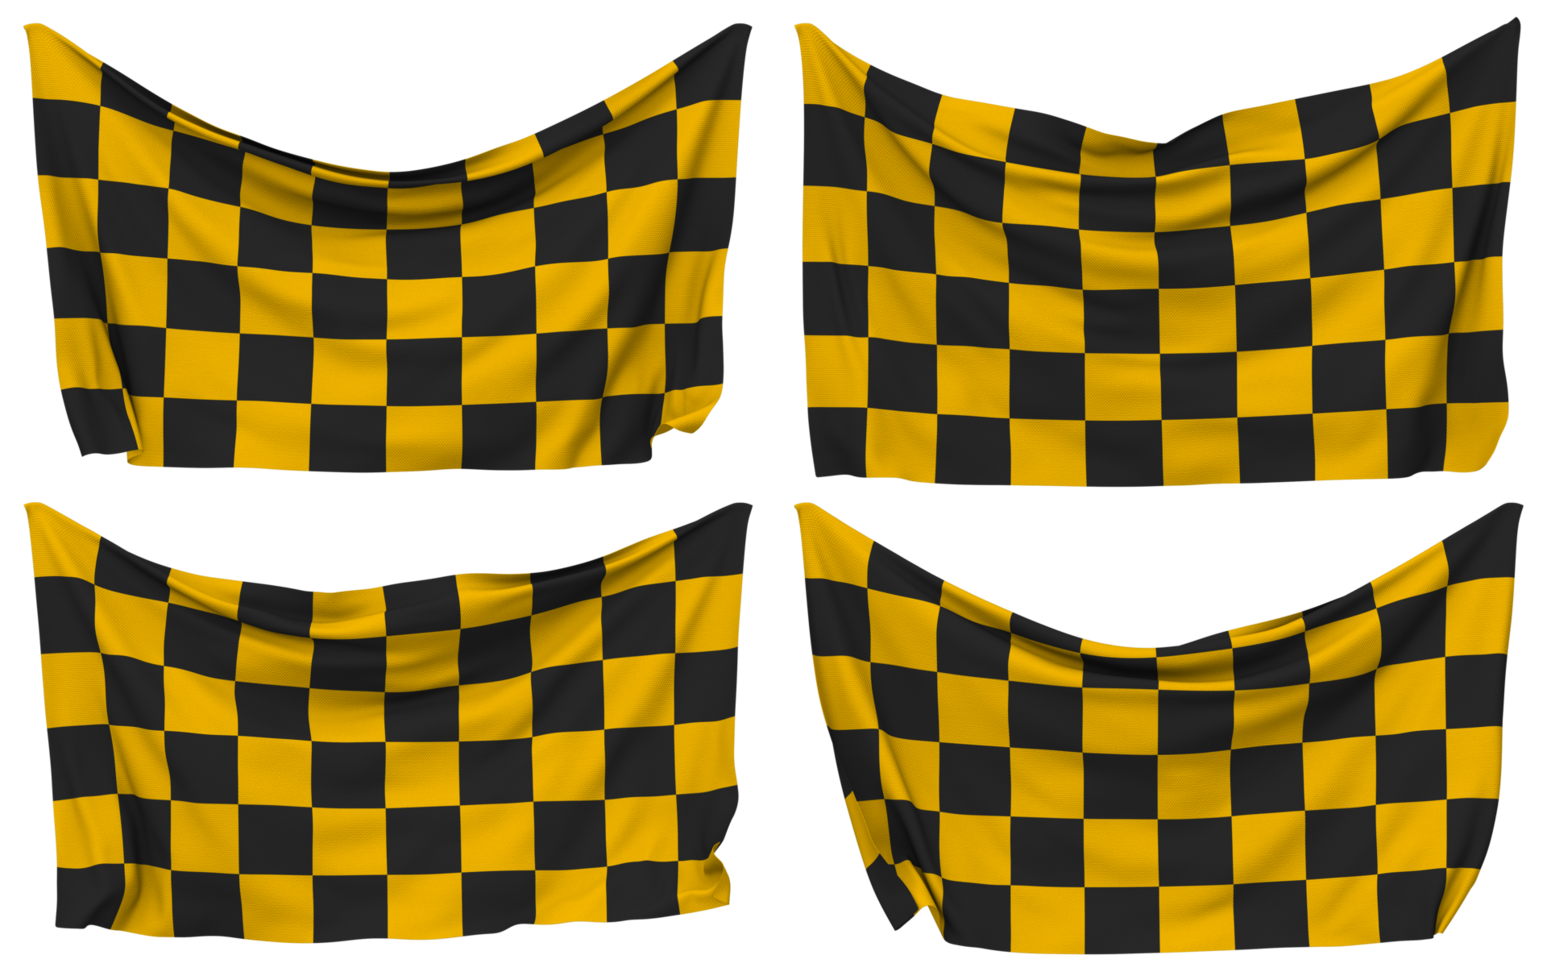 Racing Black and Yellow Checkered Pinned Flag from Corners, Isolated with Different Waving Variations, 3D Rendering png